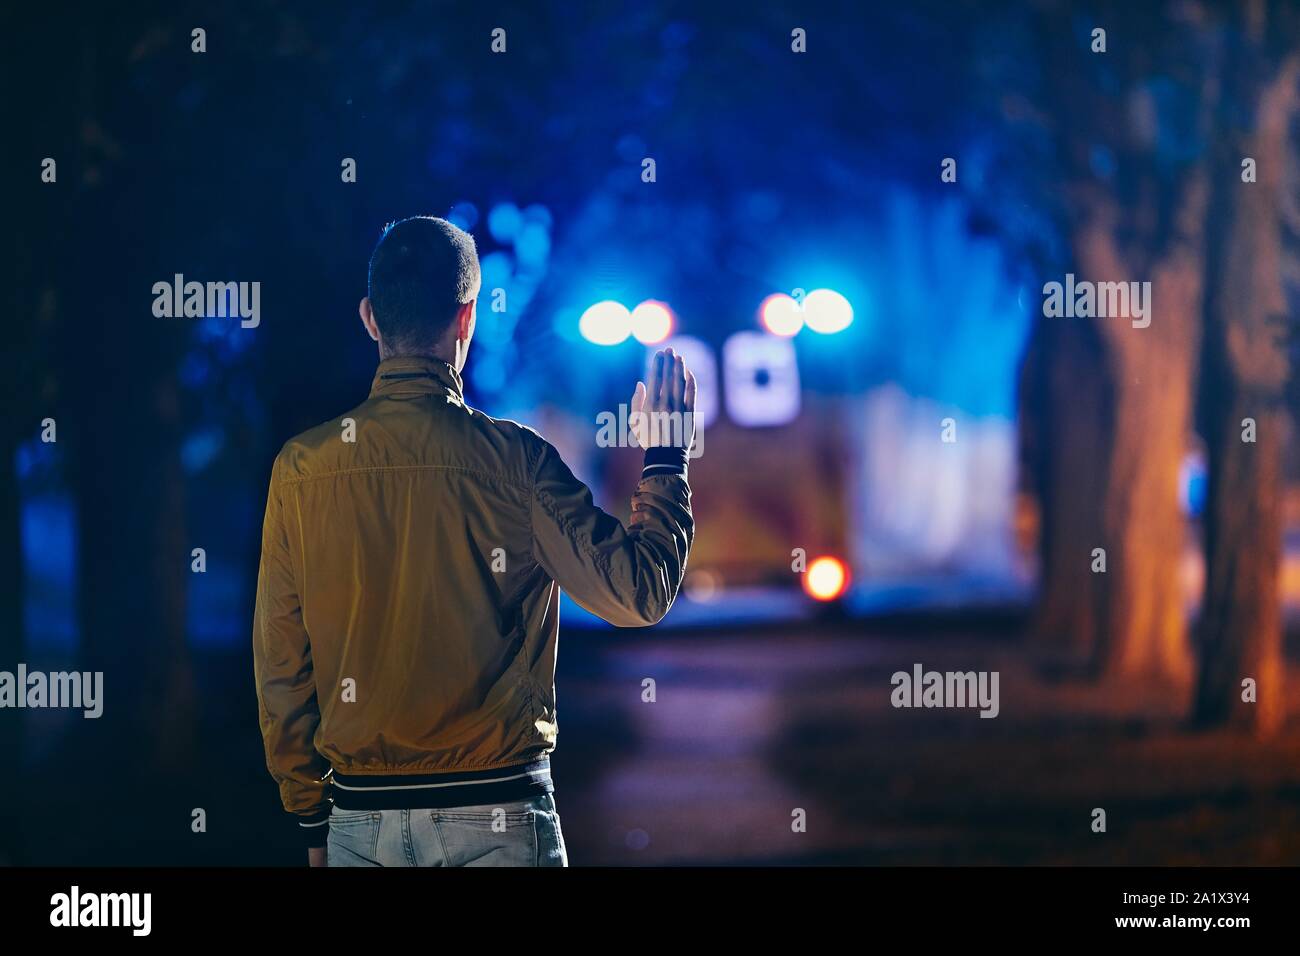 Young man looking at leaving ambulance car of emergency medical service. Concepts health care, rescue and goodbye. Stock Photo